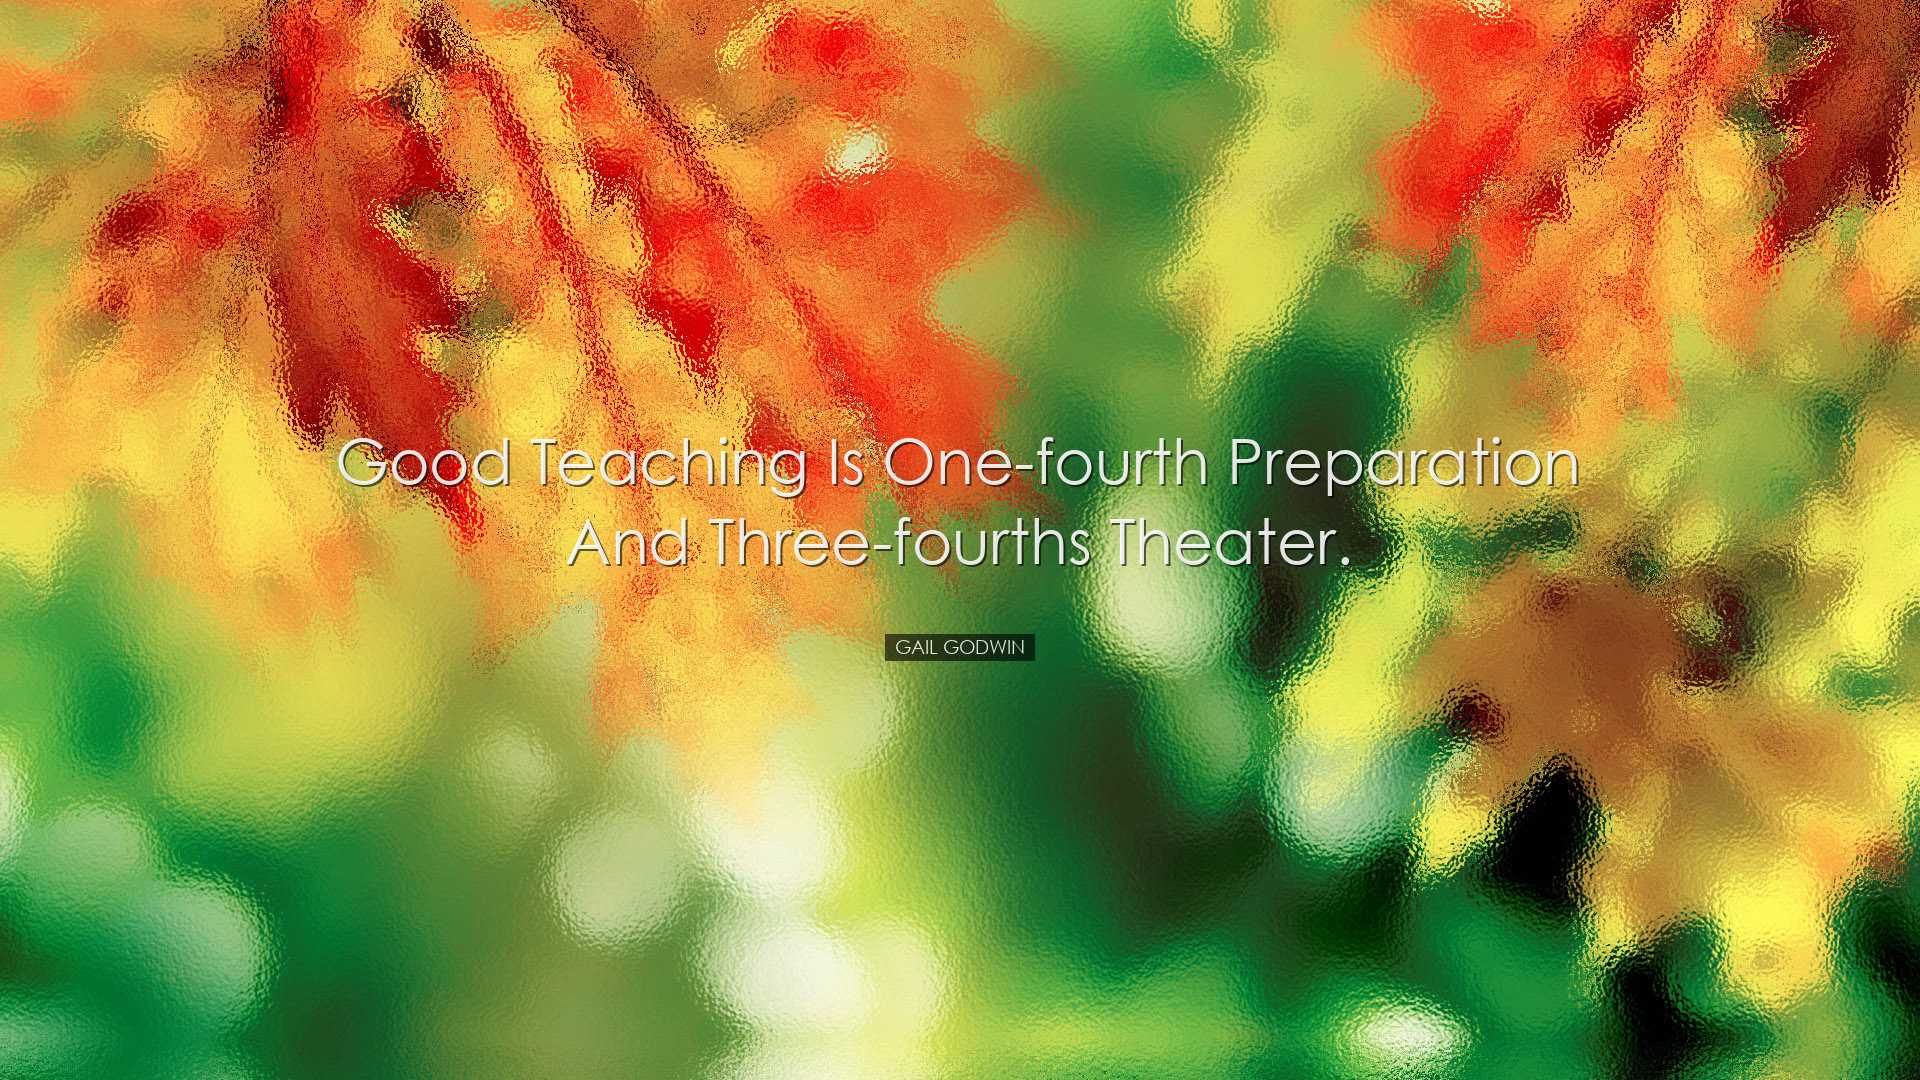 Good teaching is one-fourth preparation and three-fourths theater.